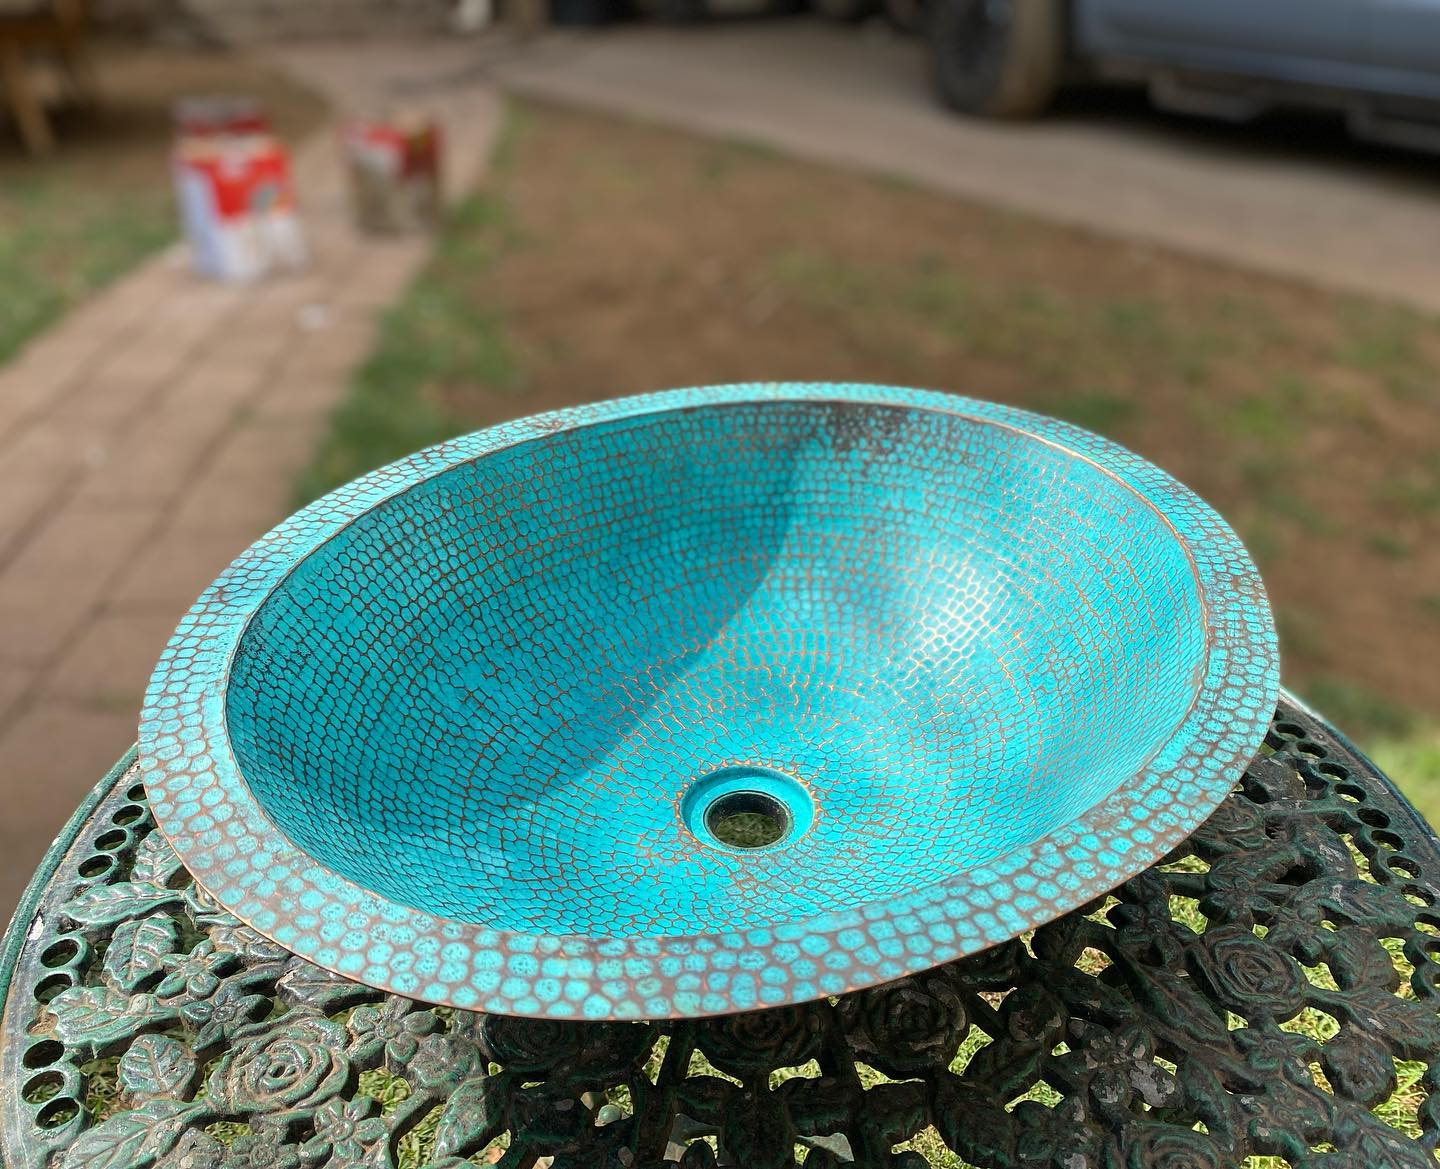 Antique Turquoise Weathered Bathroom Sink Basin in Copper - Syera - Zayian